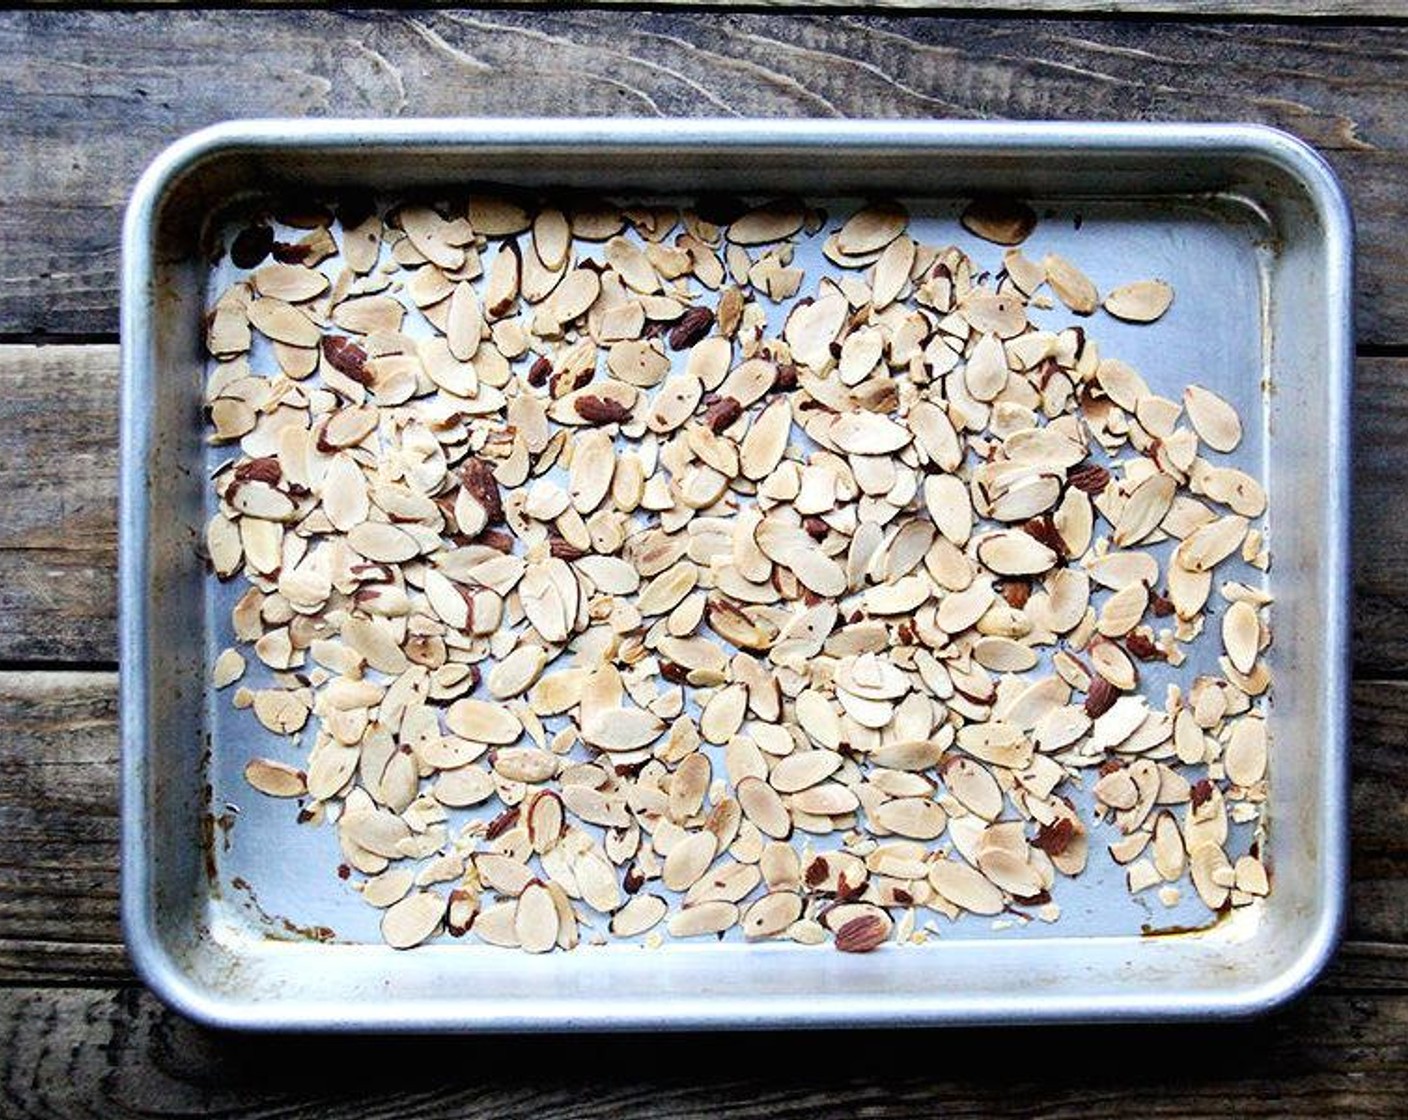 step 2 Spread Slivered Almonds (1 cup) in a single layer on a baking sheet, and bake for 7-10 minutes, until golden brown. Set aside.